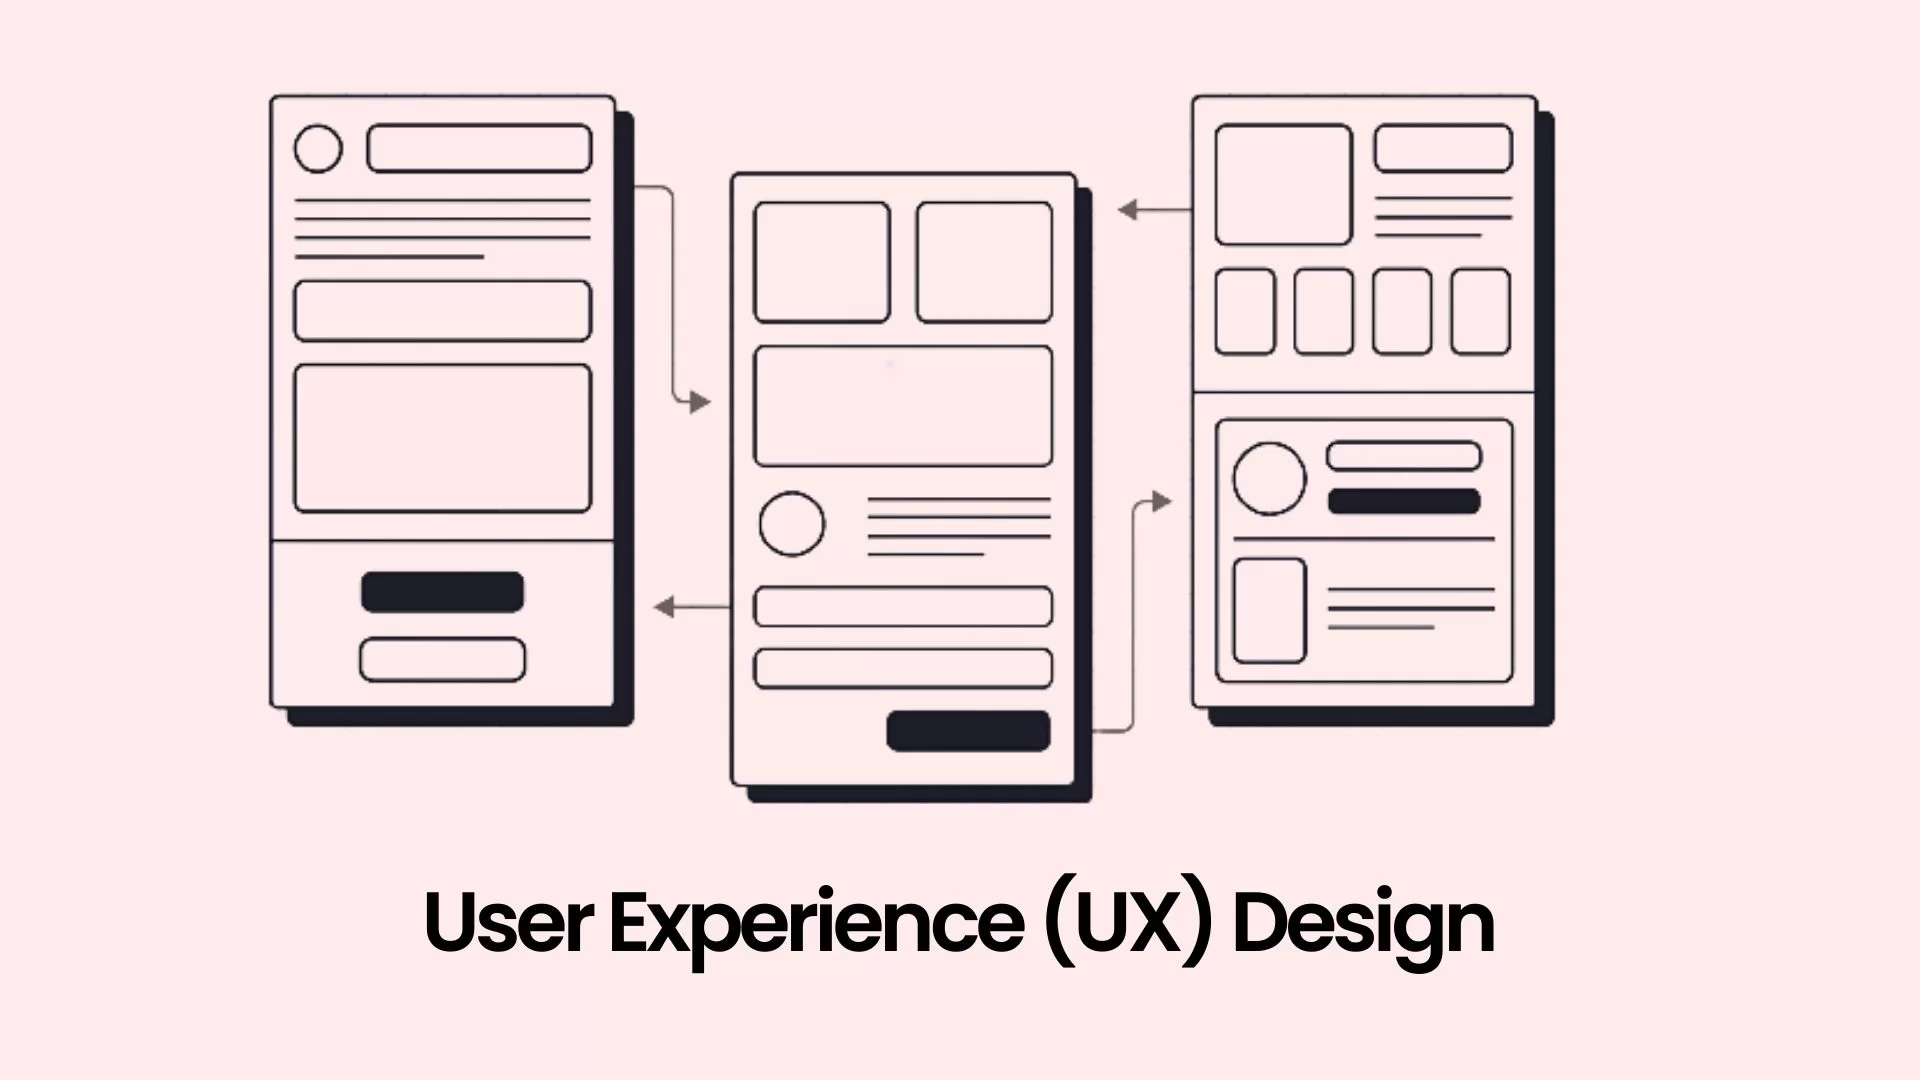 Why User Experience (UX) Design Matters